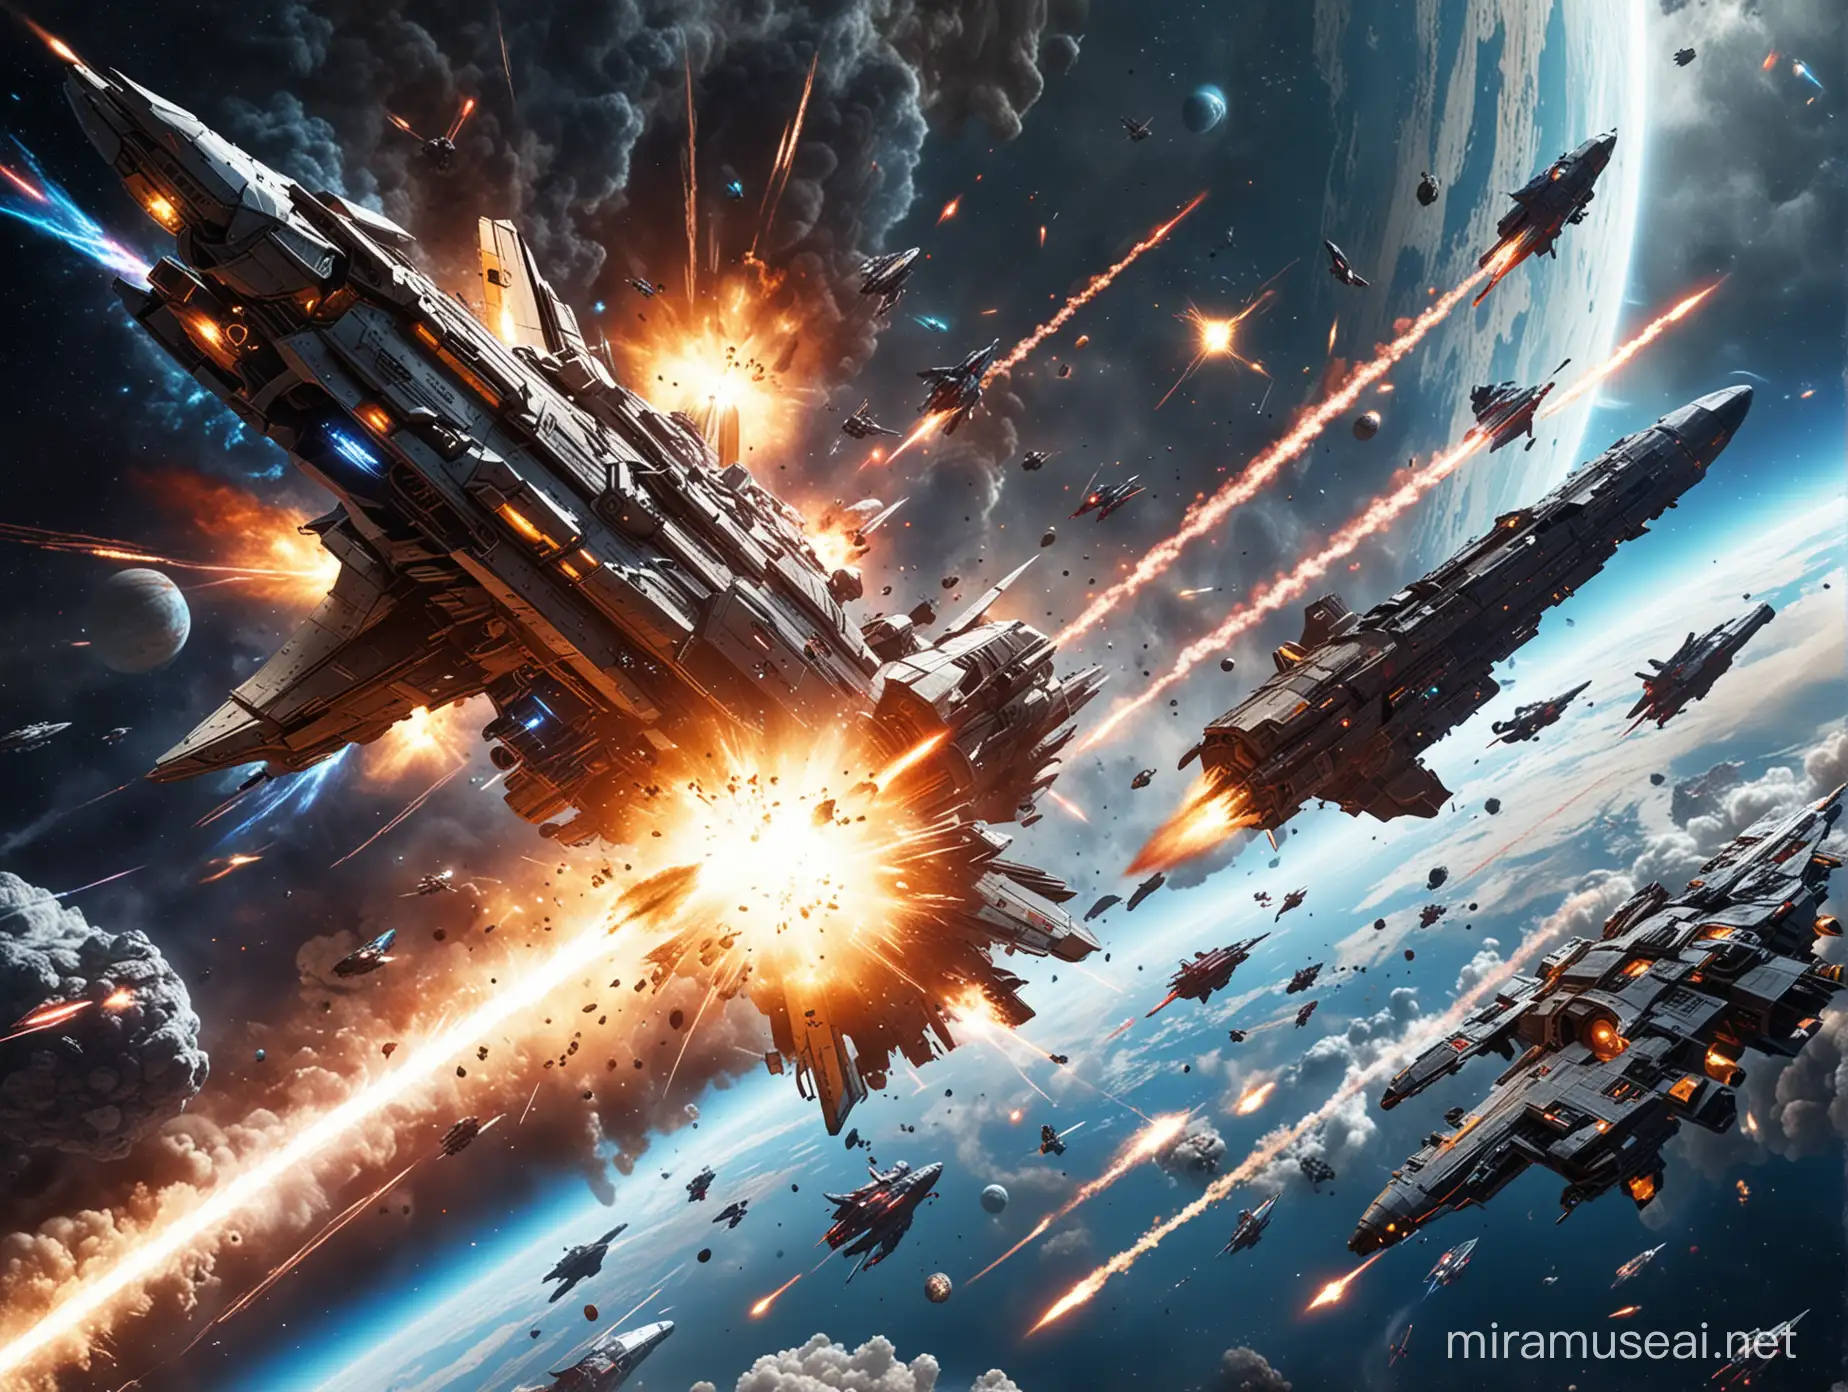 Intergalactic Space Battle Starships Engage in Epic Duel Amidst Exploding Ship and Distant Planet